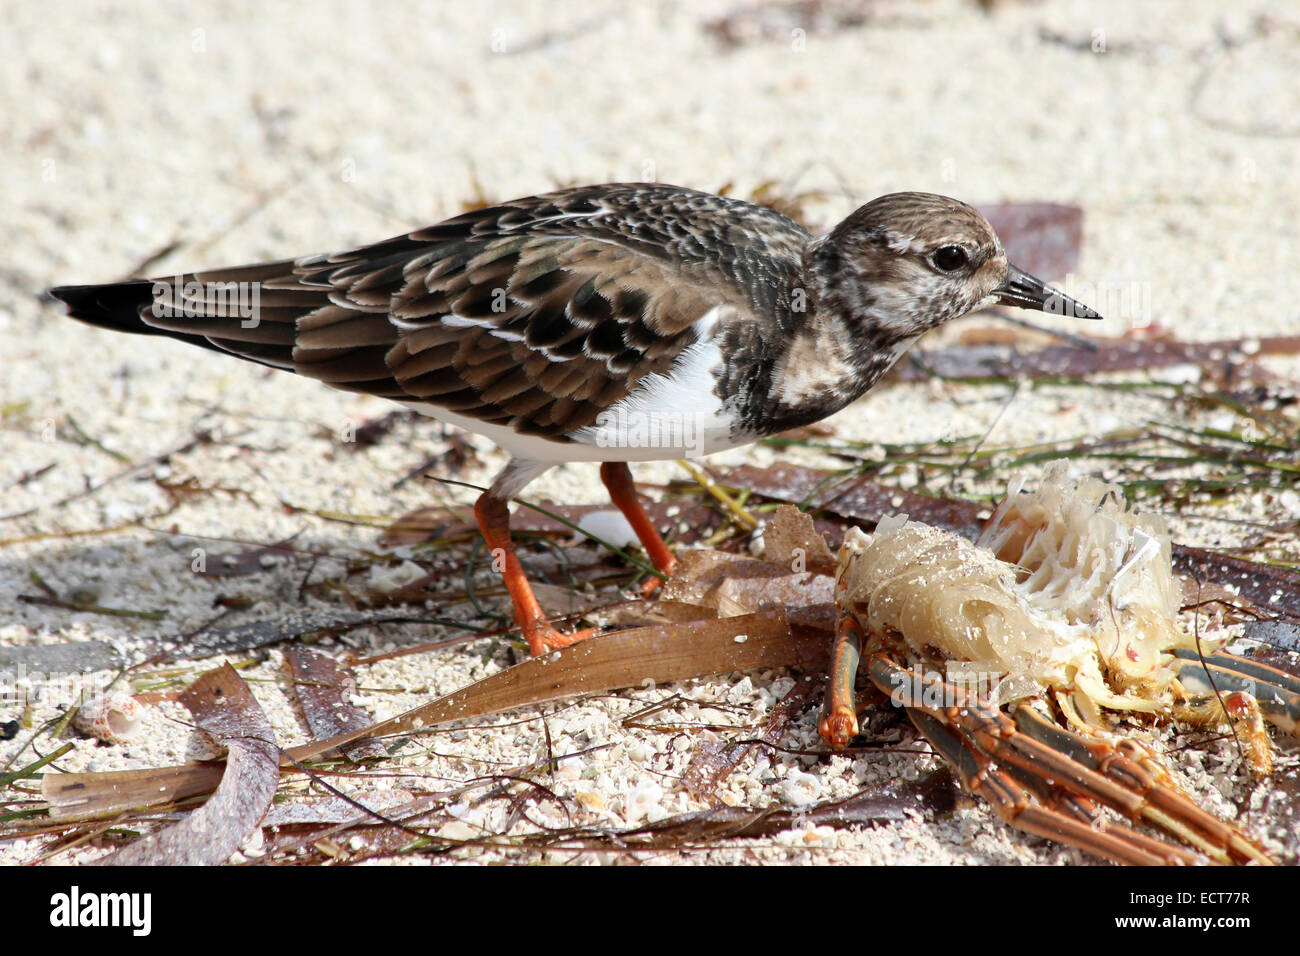 Ruddy Turnstone Arenaria interpres Feeding On The Remains Of Caribbean Spiny Lobster Panulinus argus Stock Photo